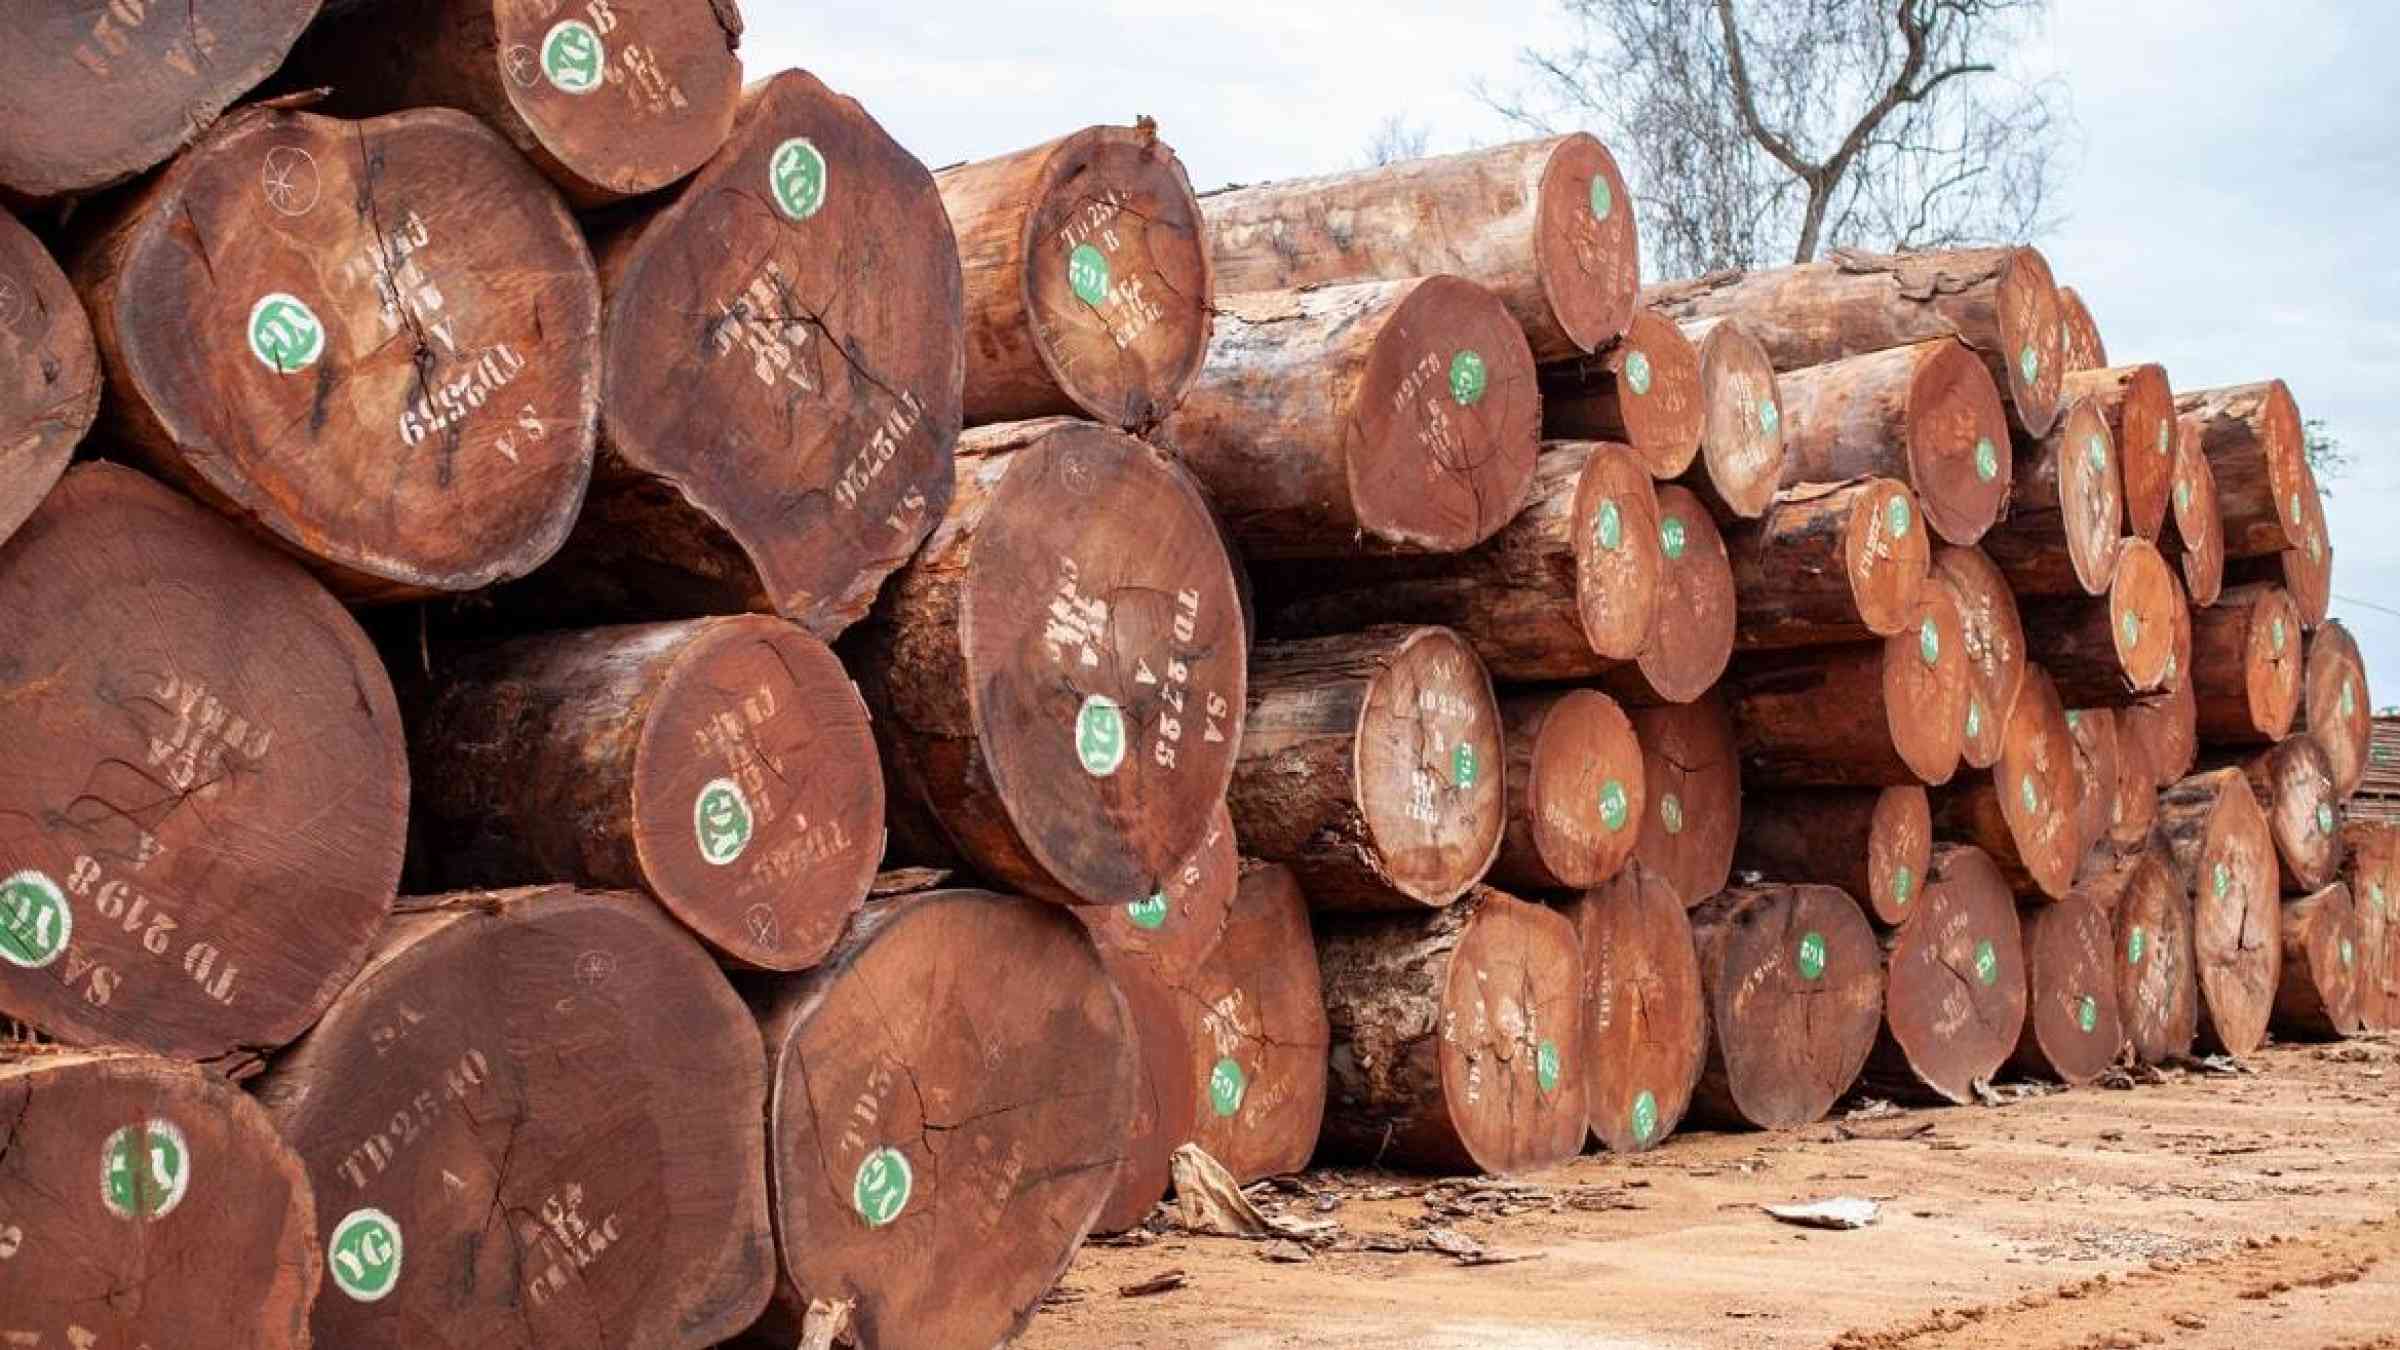 Logs stacked from a West African logging site